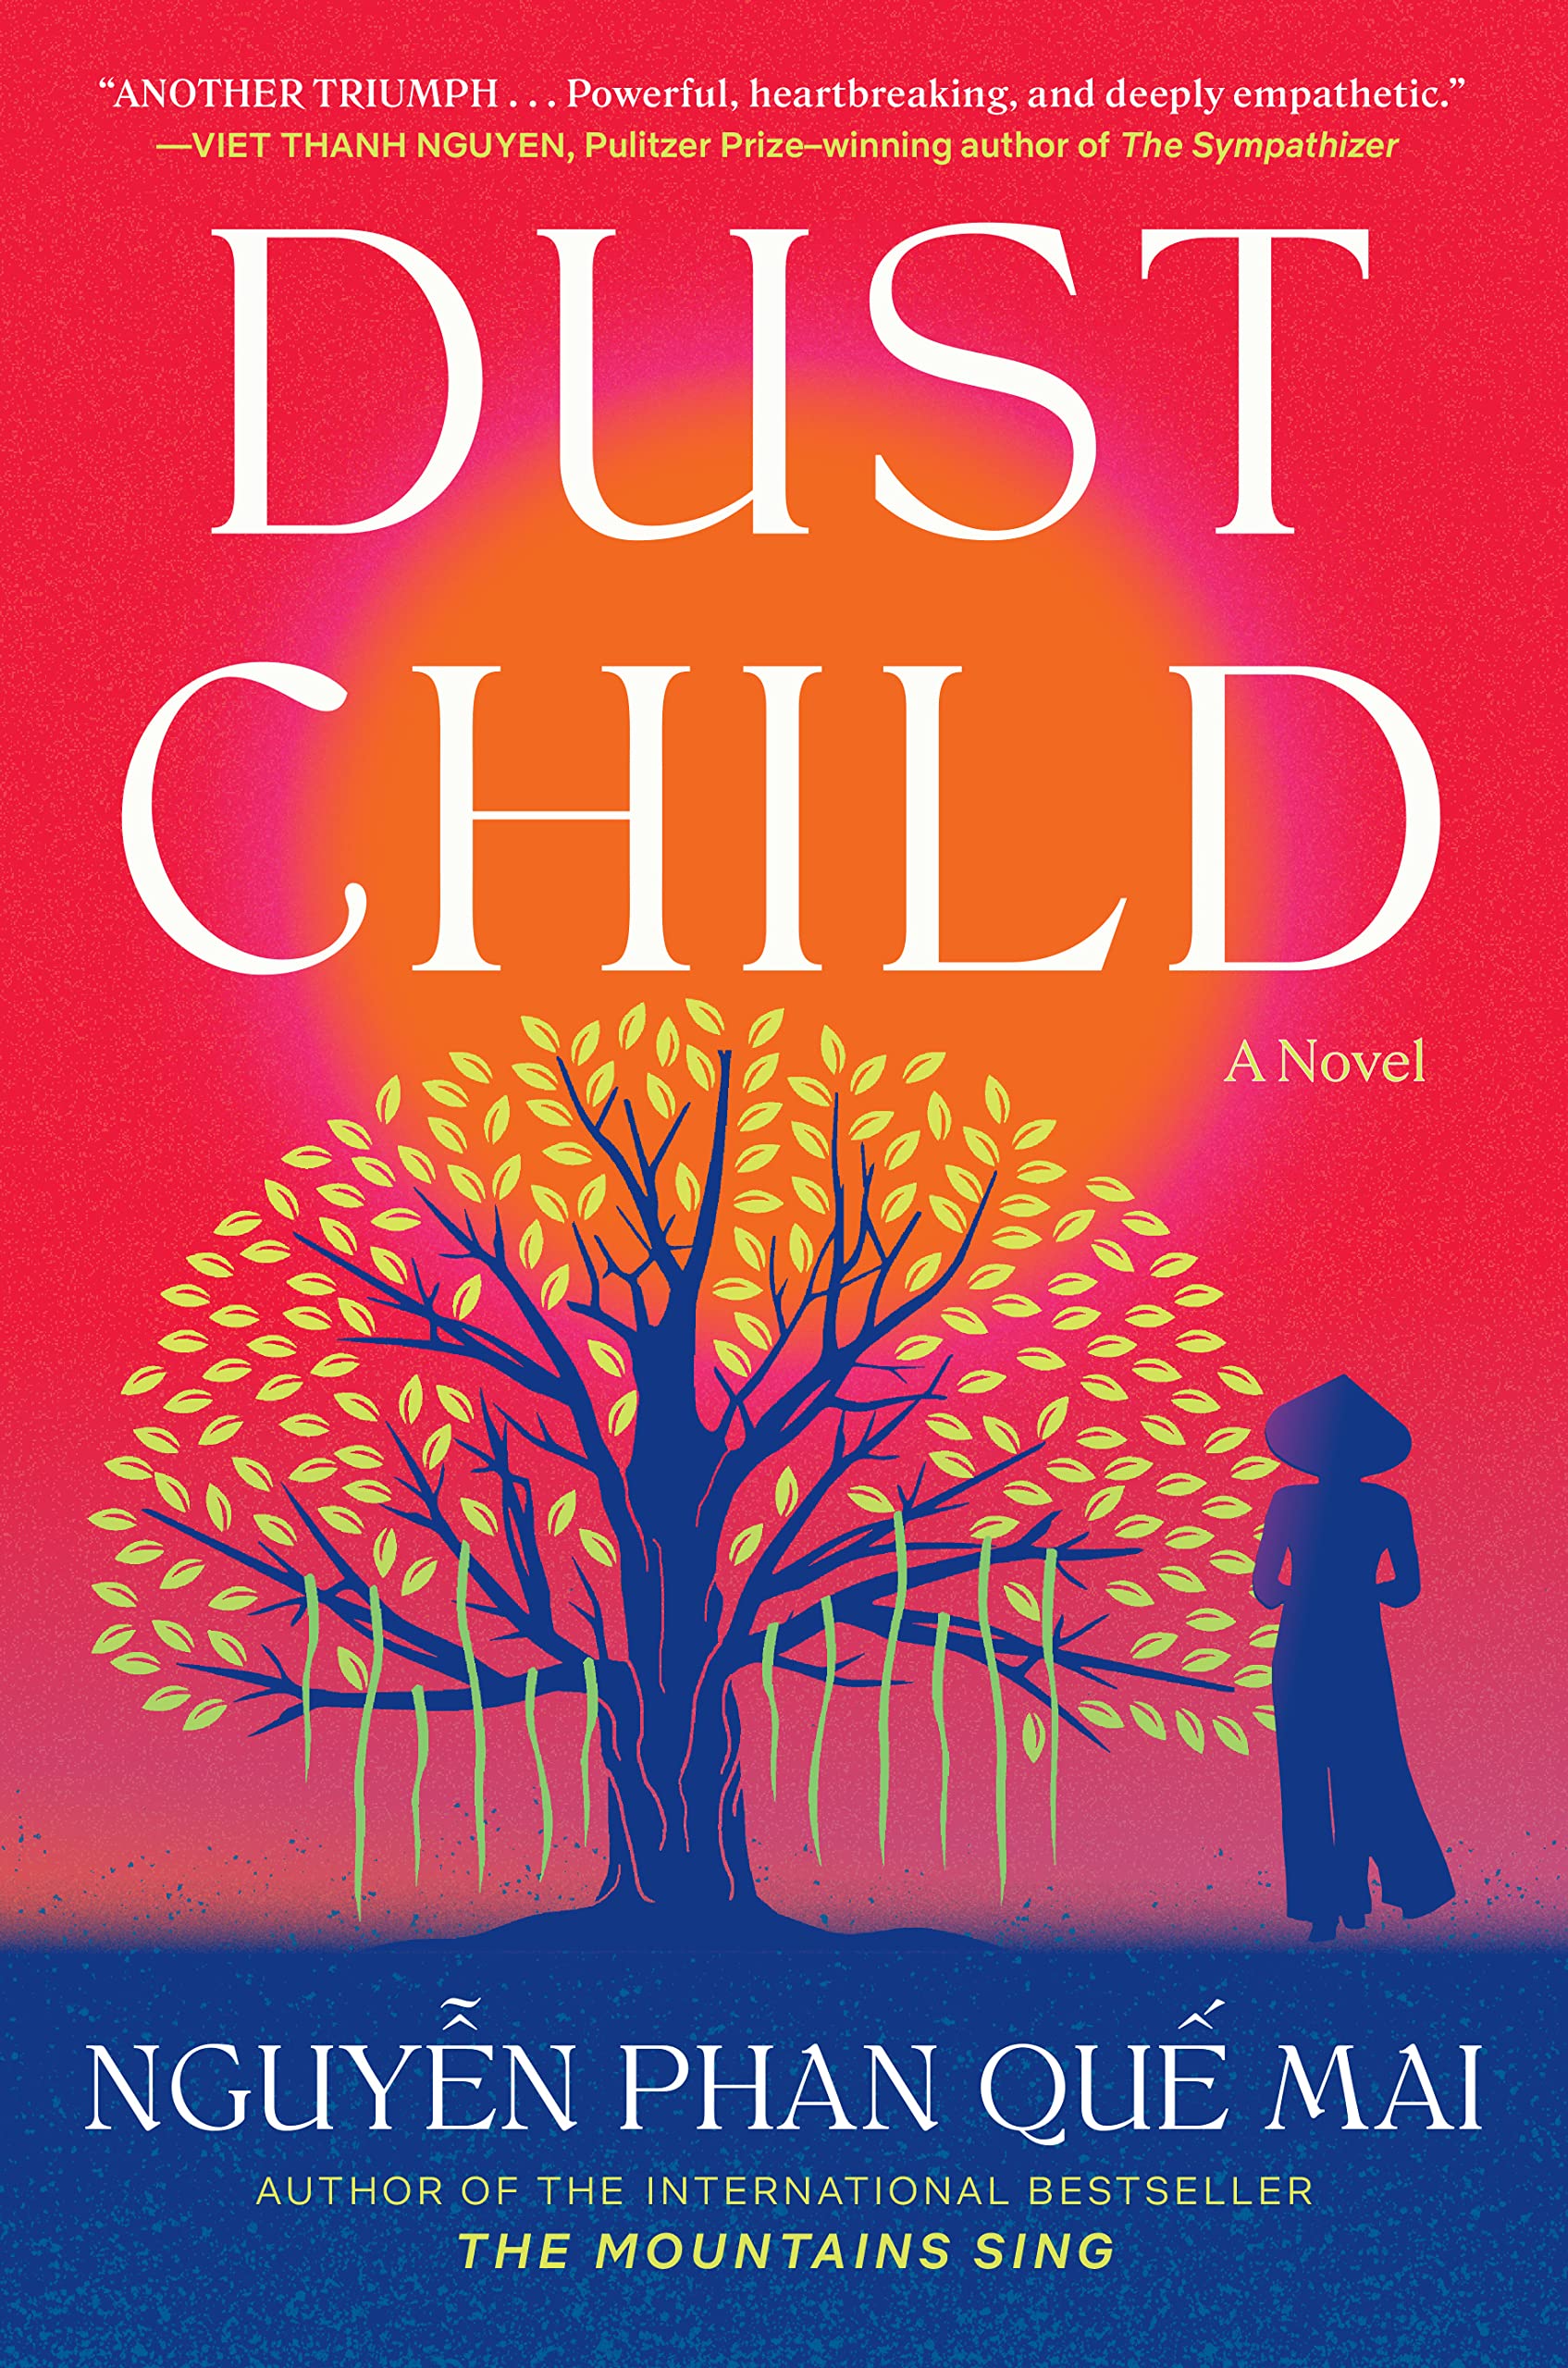 Image for "Dust Child"